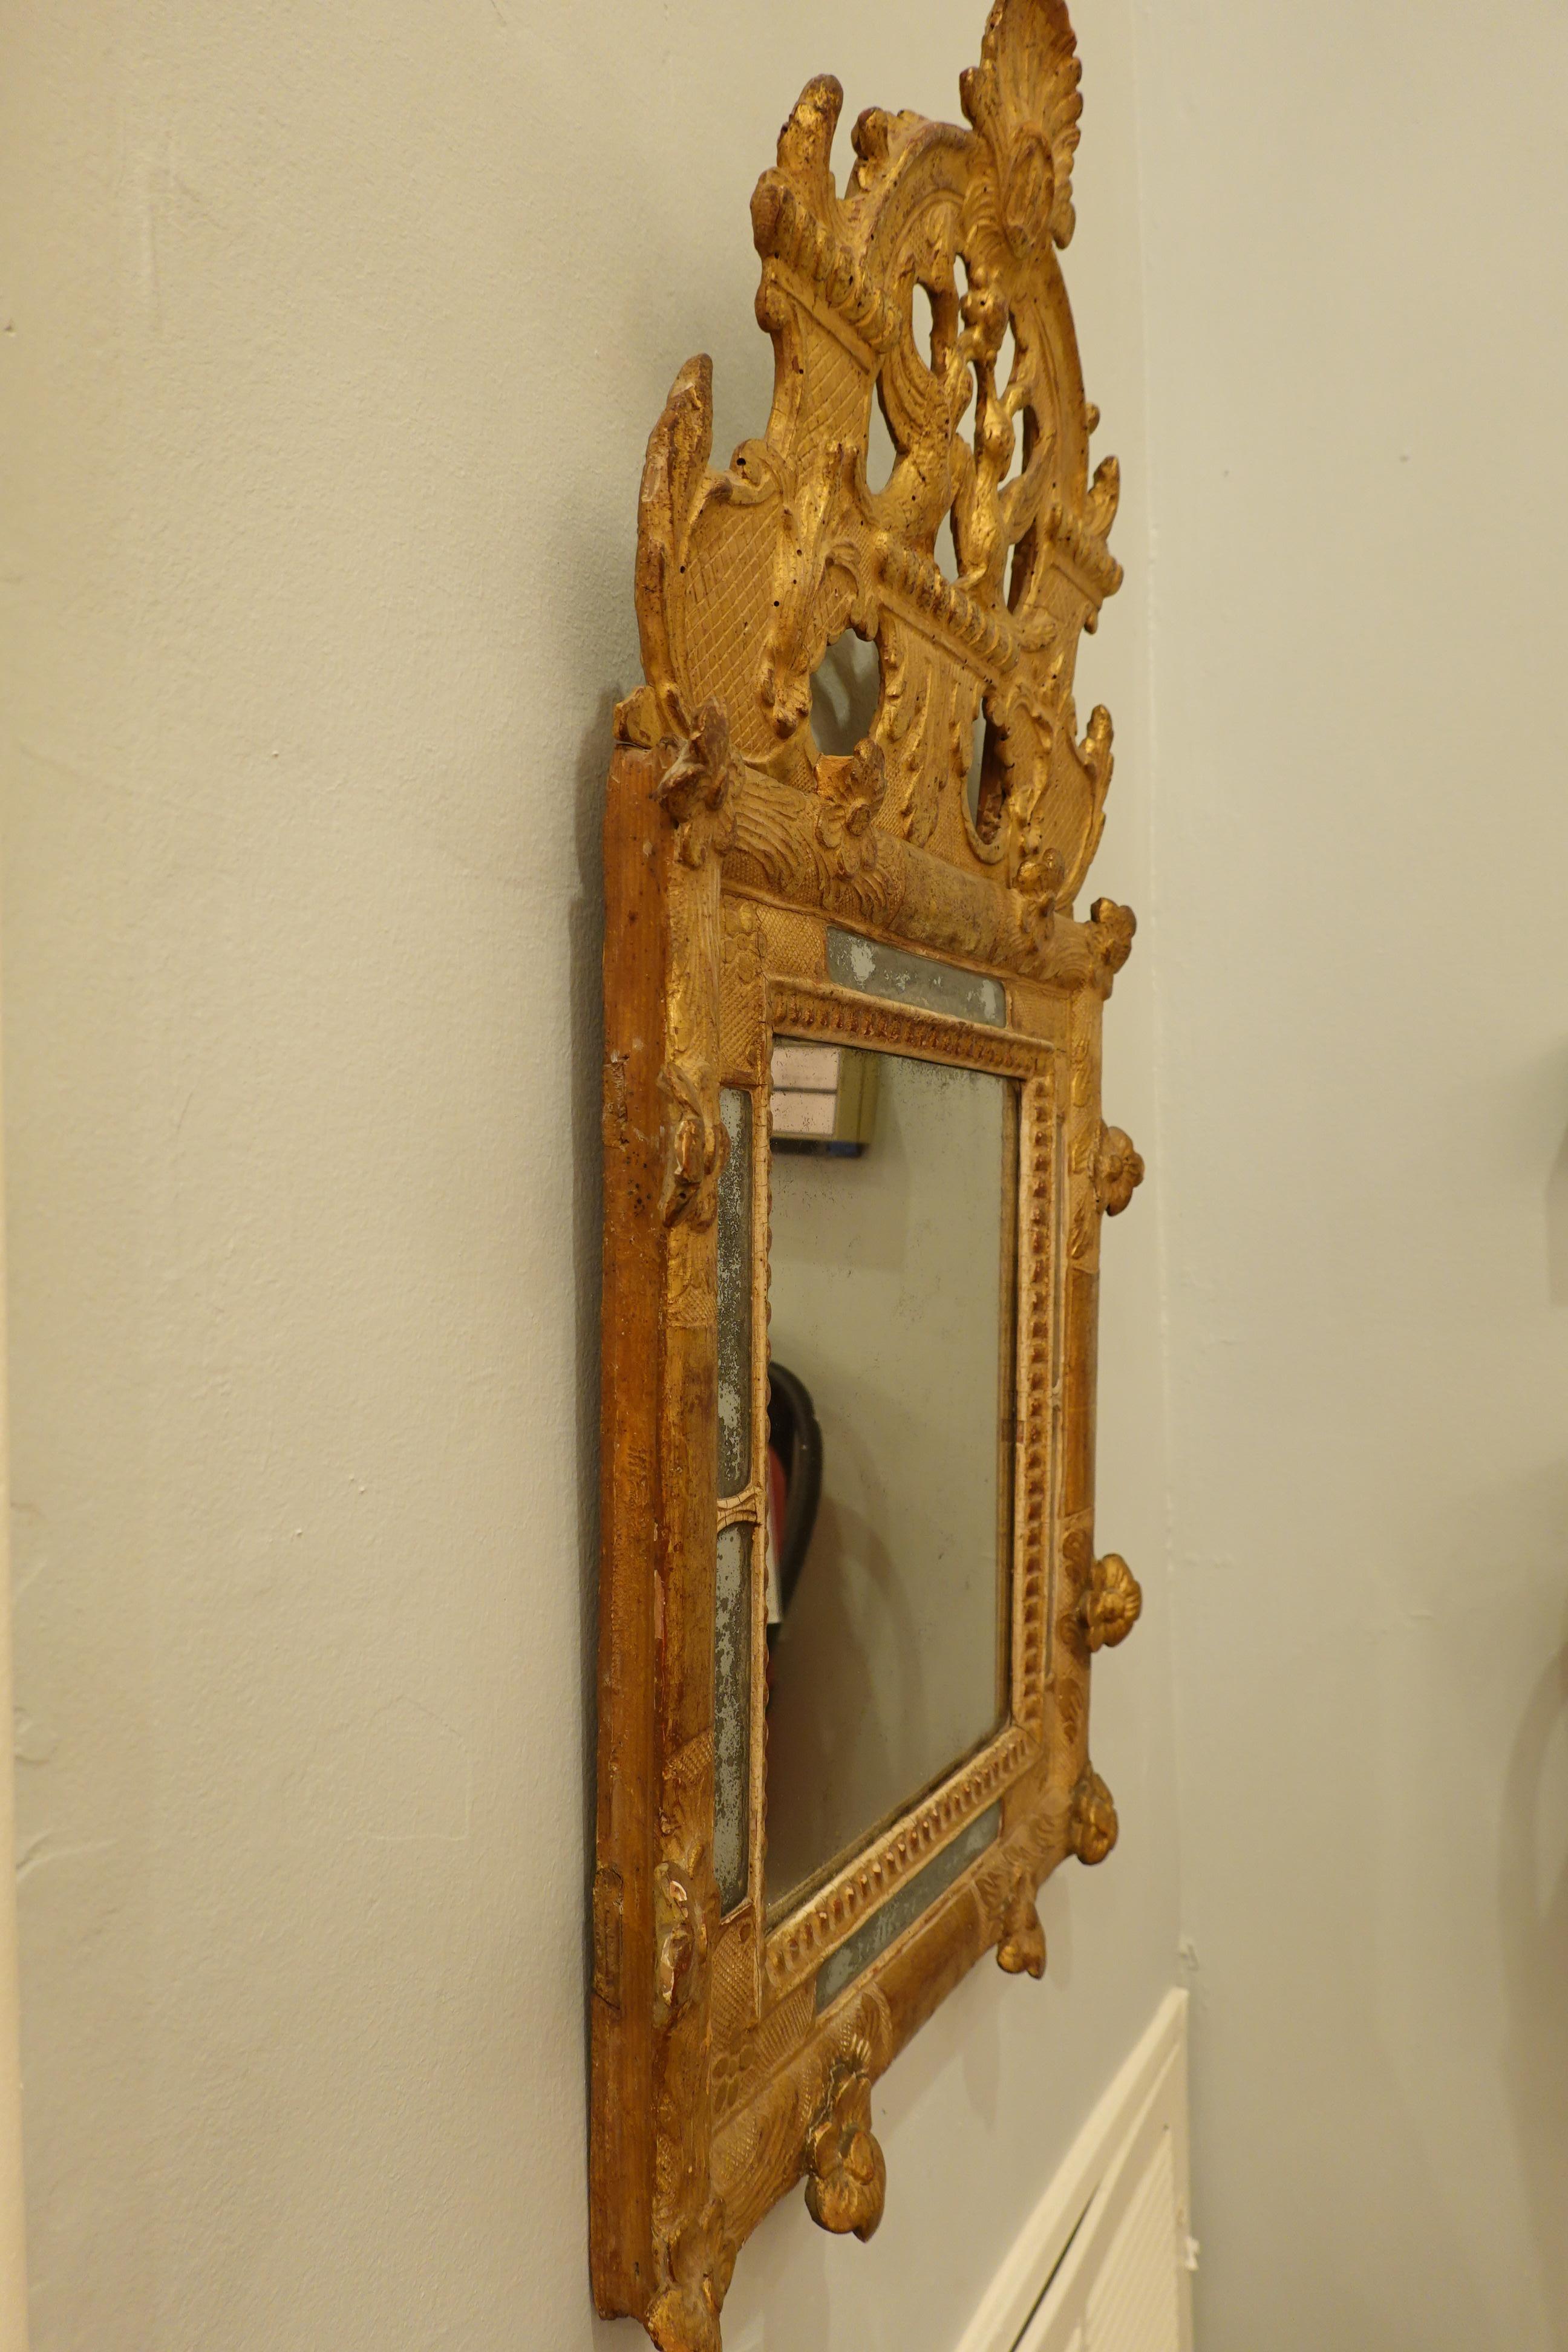 French Regence Period Giltwood Mirror with Birds, Scallop Shell and Flowers For Sale 6